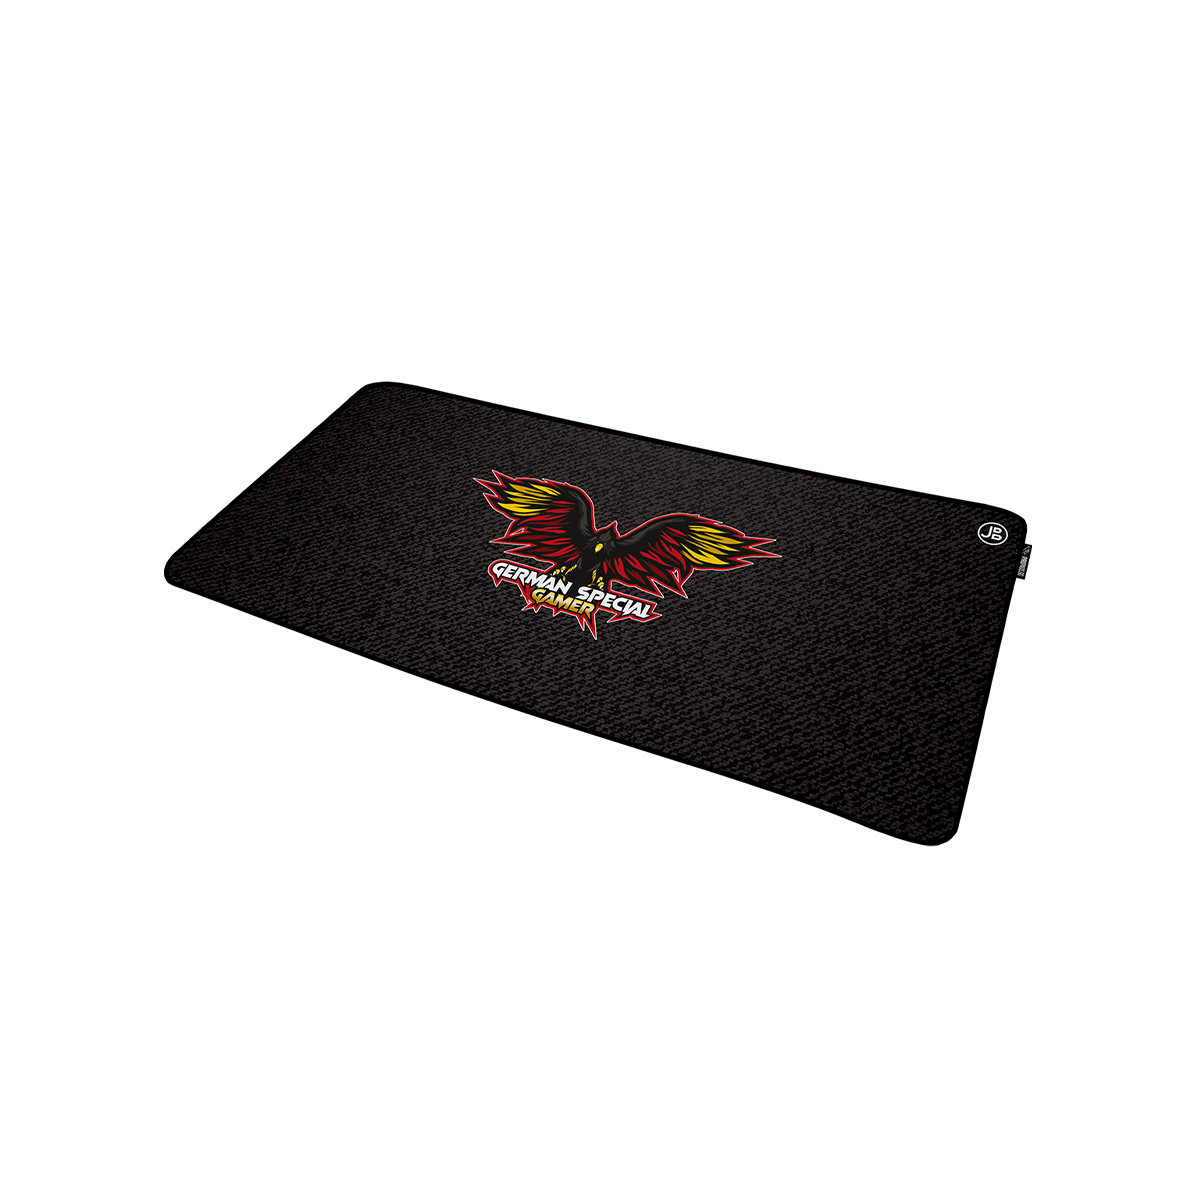 GERMAN SPECIAL GAMERS - Mousepad - XXL